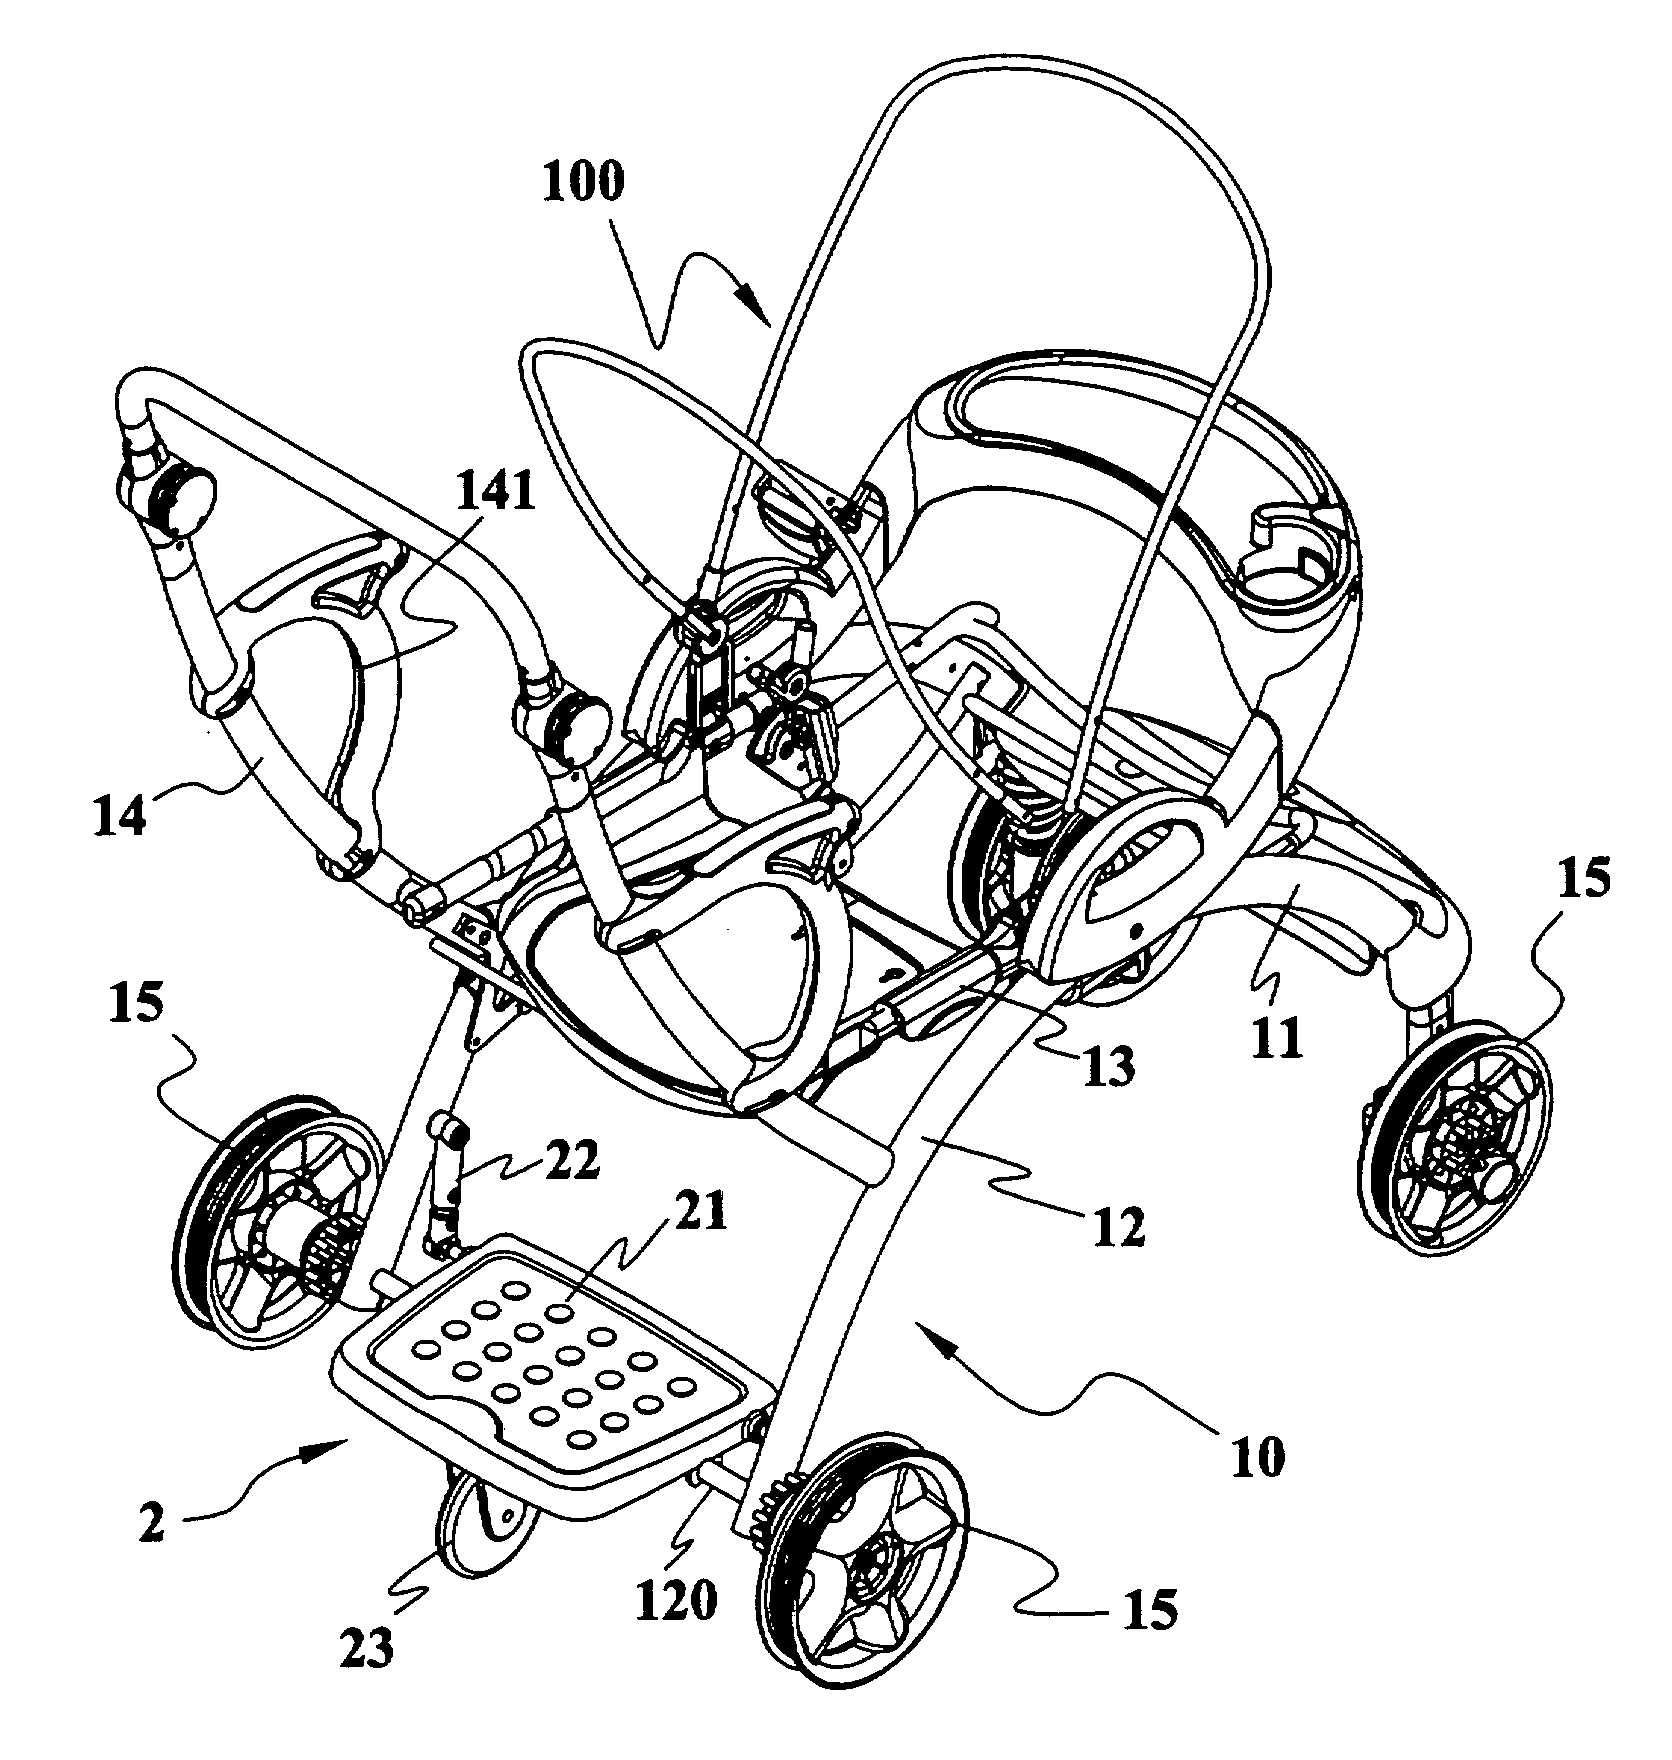 Wheeled tail platform for a stroller